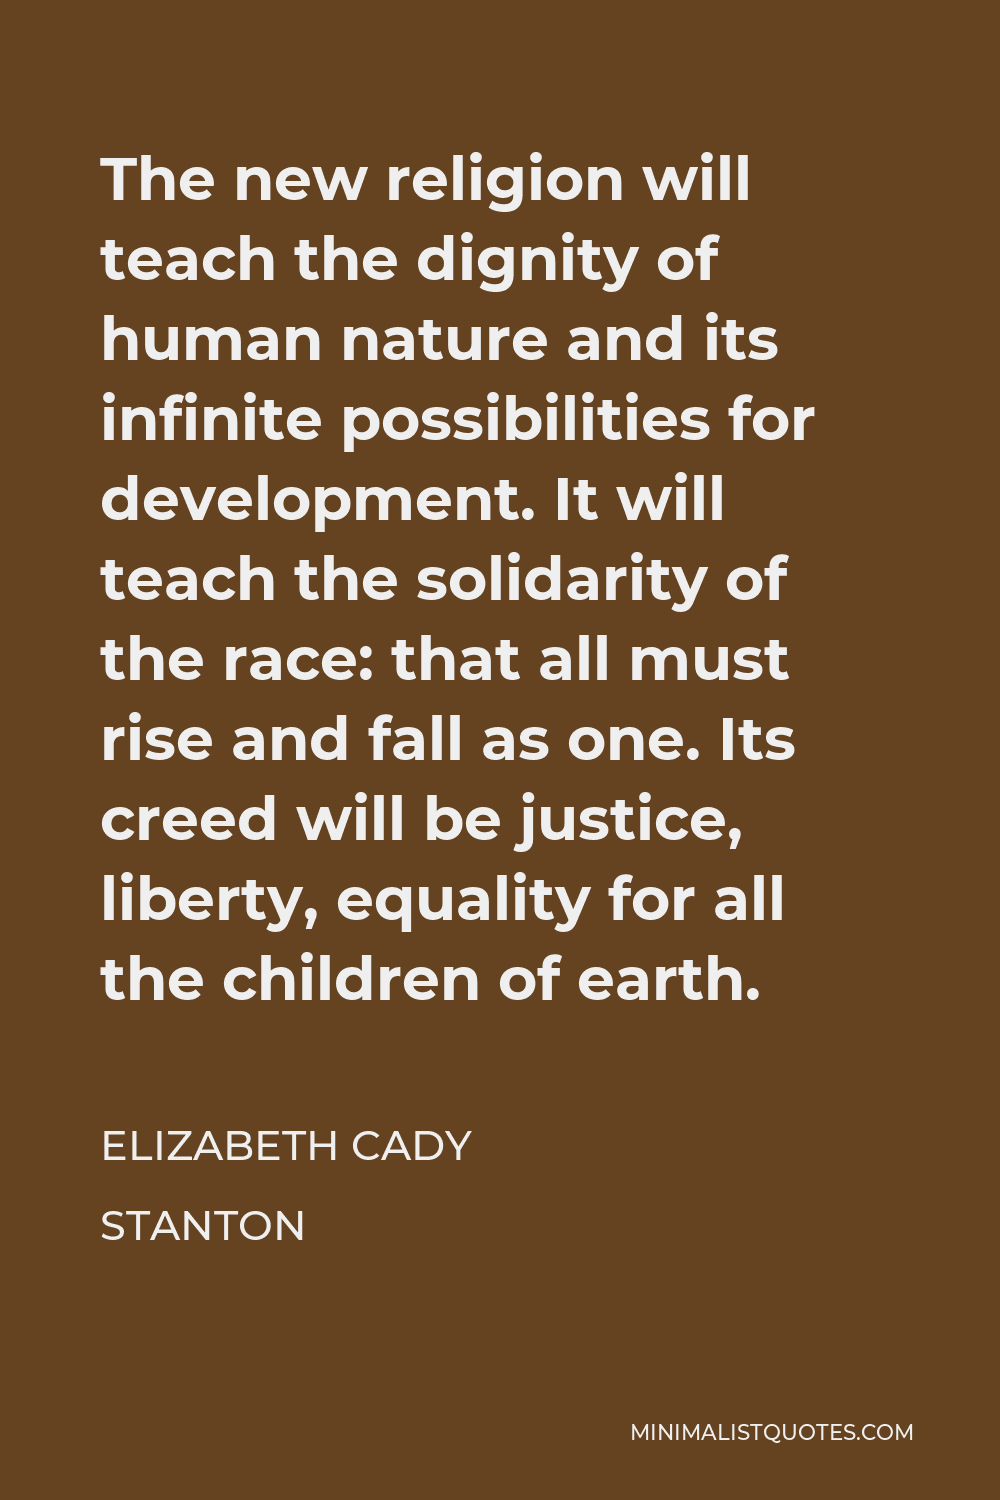 Elizabeth Cady Stanton Quote - The new religion will teach the dignity of human nature and its infinite possibilities for development. It will teach the solidarity of the race: that all must rise and fall as one. Its creed will be justice, liberty, equality for all the children of earth.